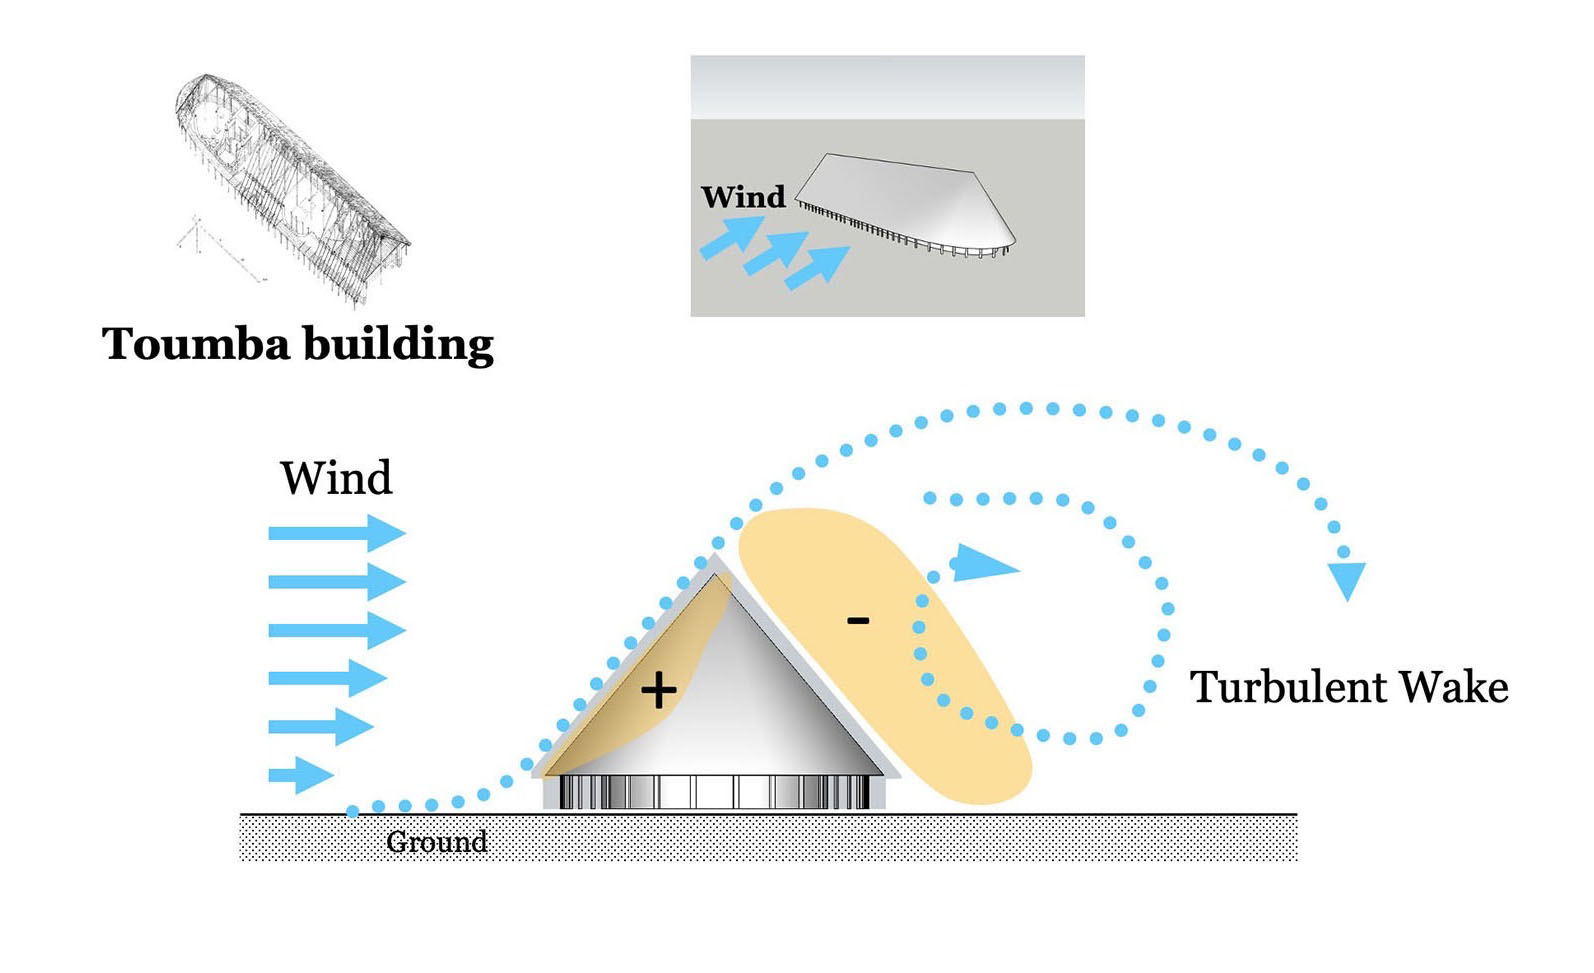 An illustration of a small building with dotted lines flowing over the roof to show wind movement.